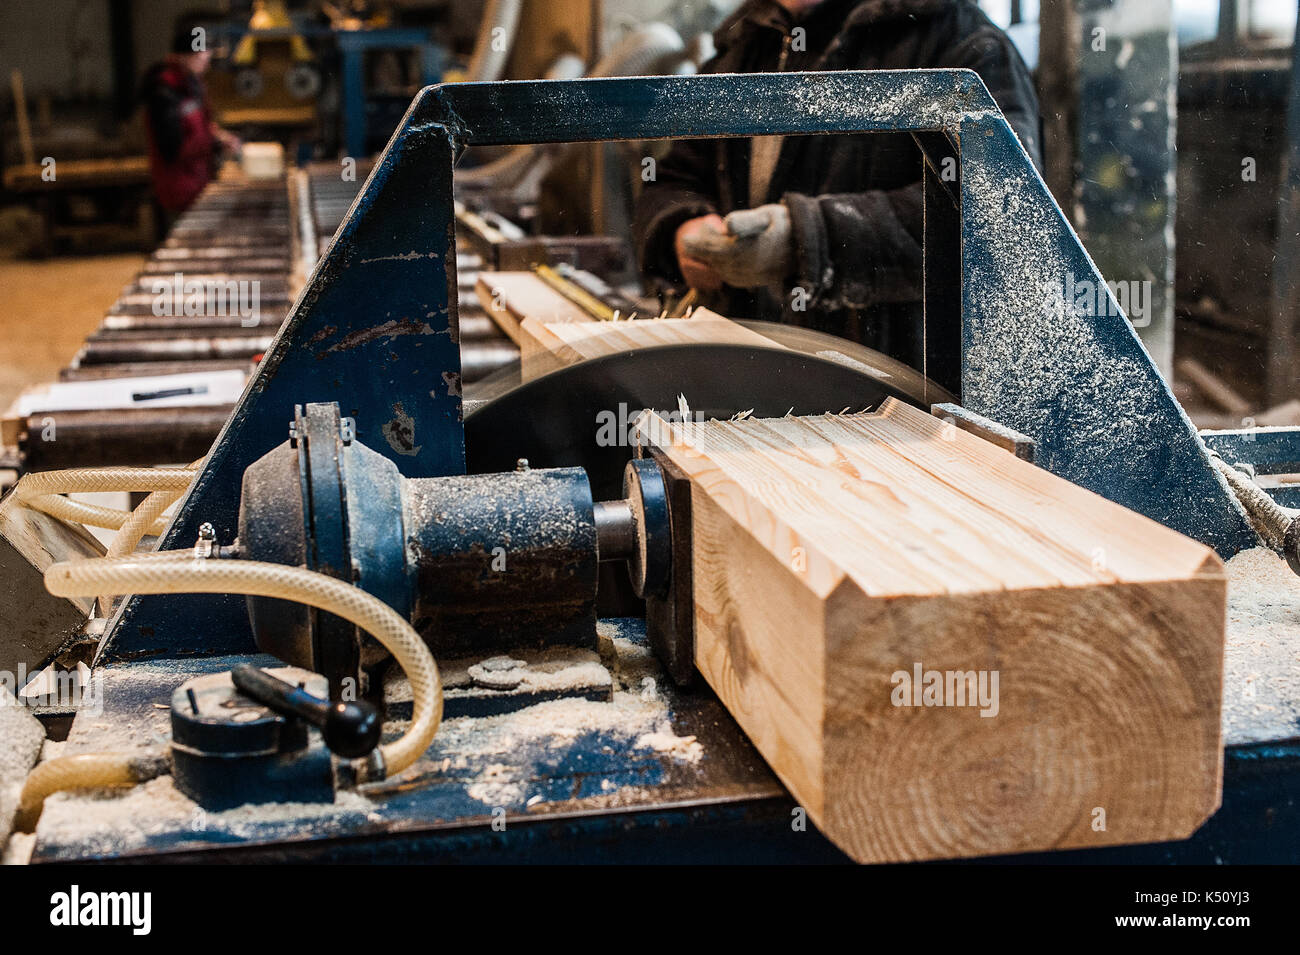 Circular Saw. Carpenter Using Circular Saw for wood. Woodworking machine sawing wooden beam. in progress with another view Stock Photo